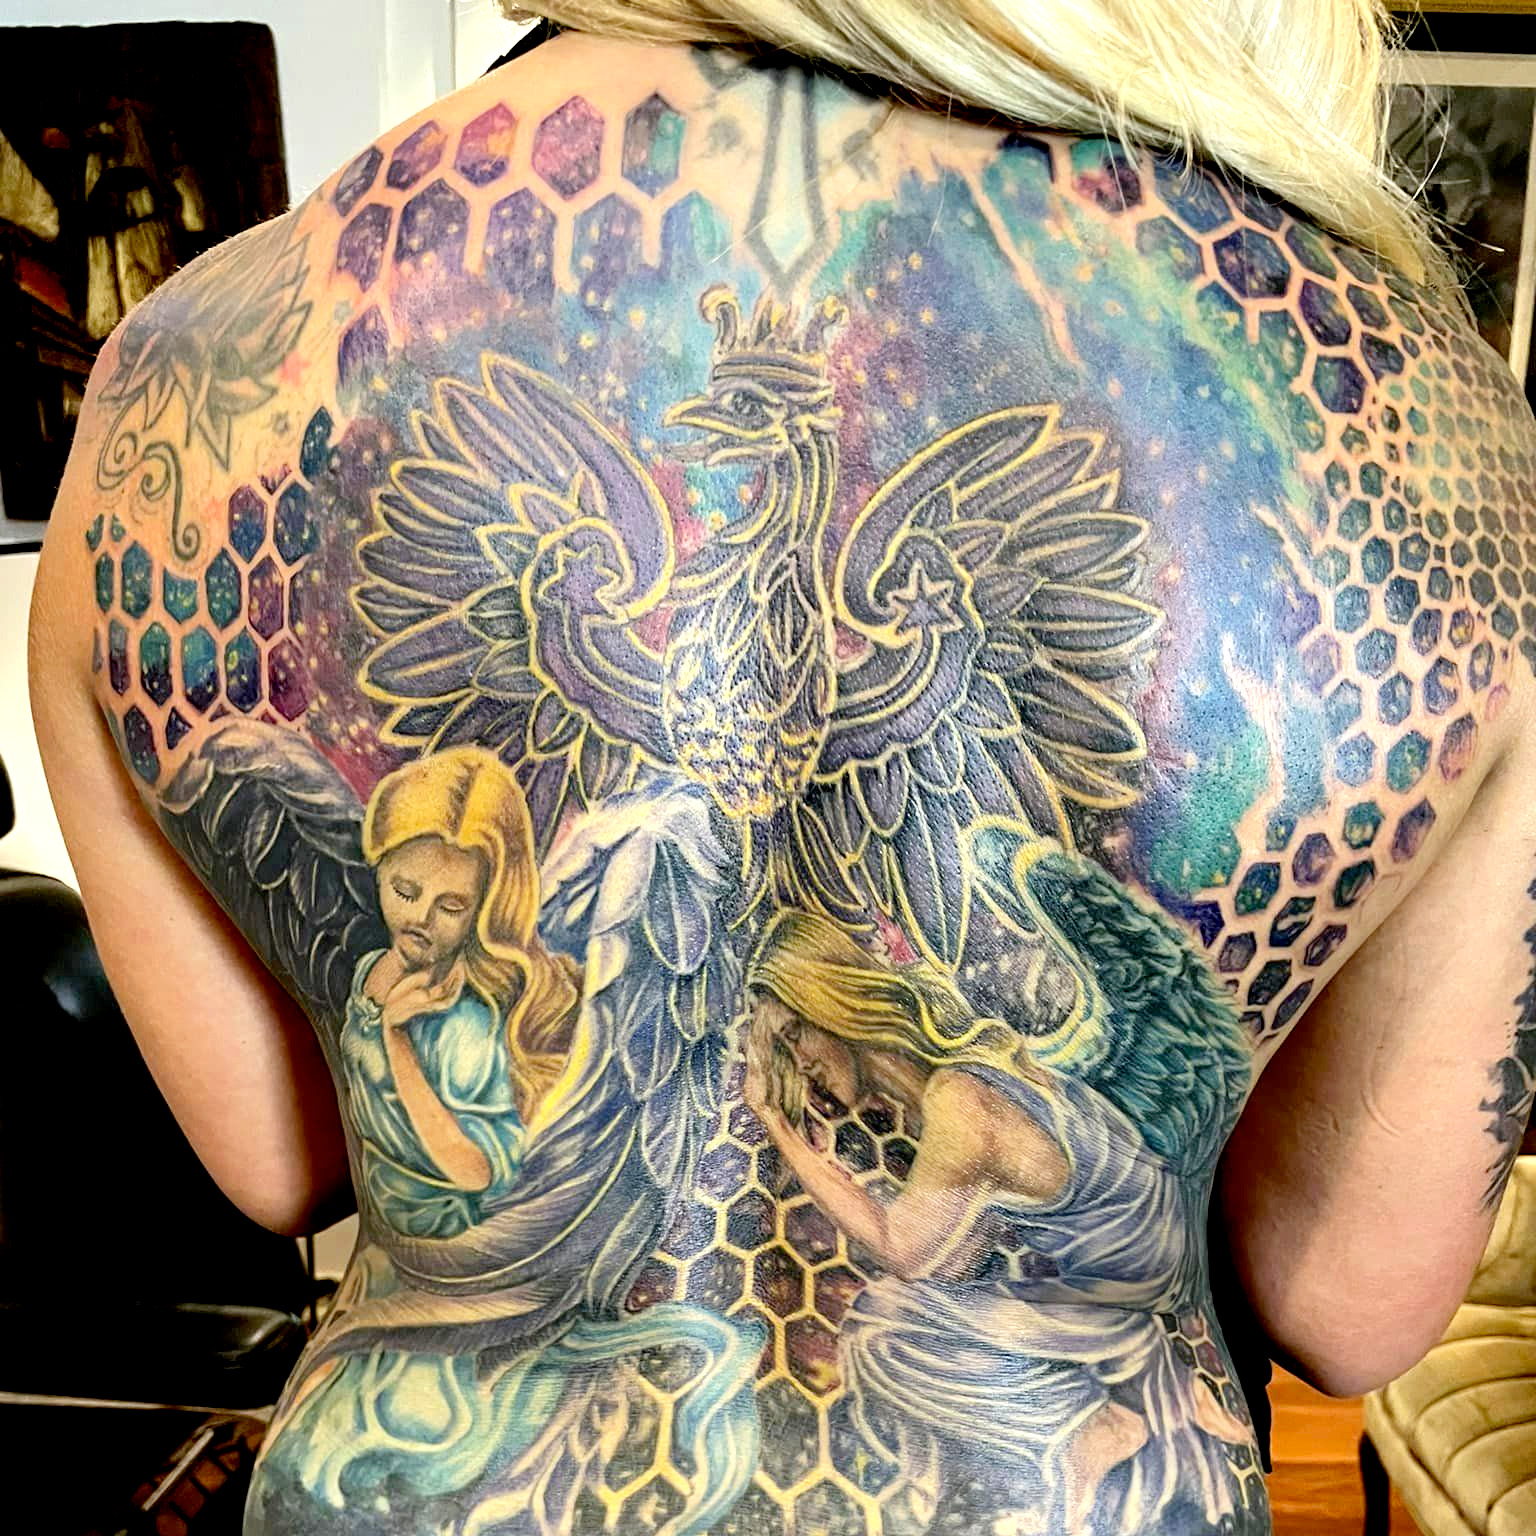   Emily Page tattoo artist from Cary NC  